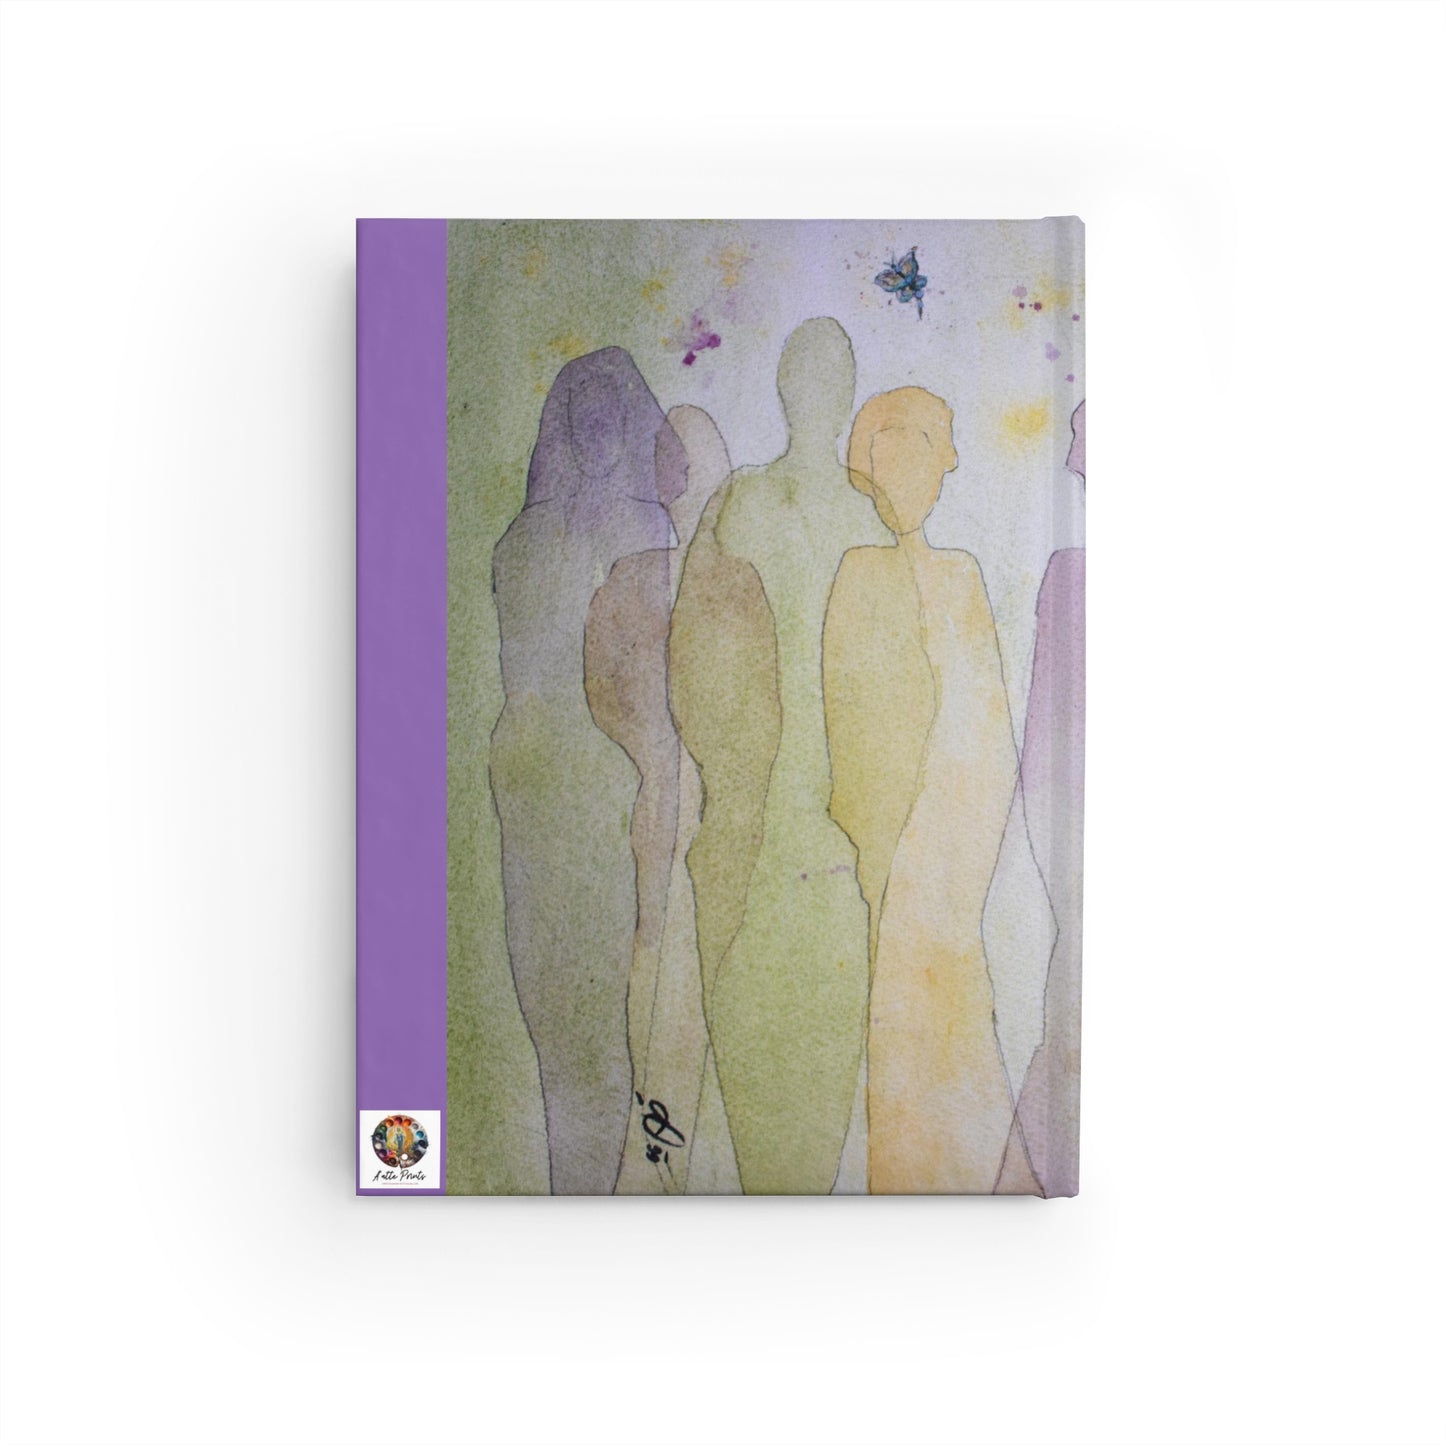 Shadows of Love, Watercolor Journal/Notebook - J. Wesley Bailey IV Inspired, 128 Blank Pages, Artistic Sketch & Writing Diary, Hardcover